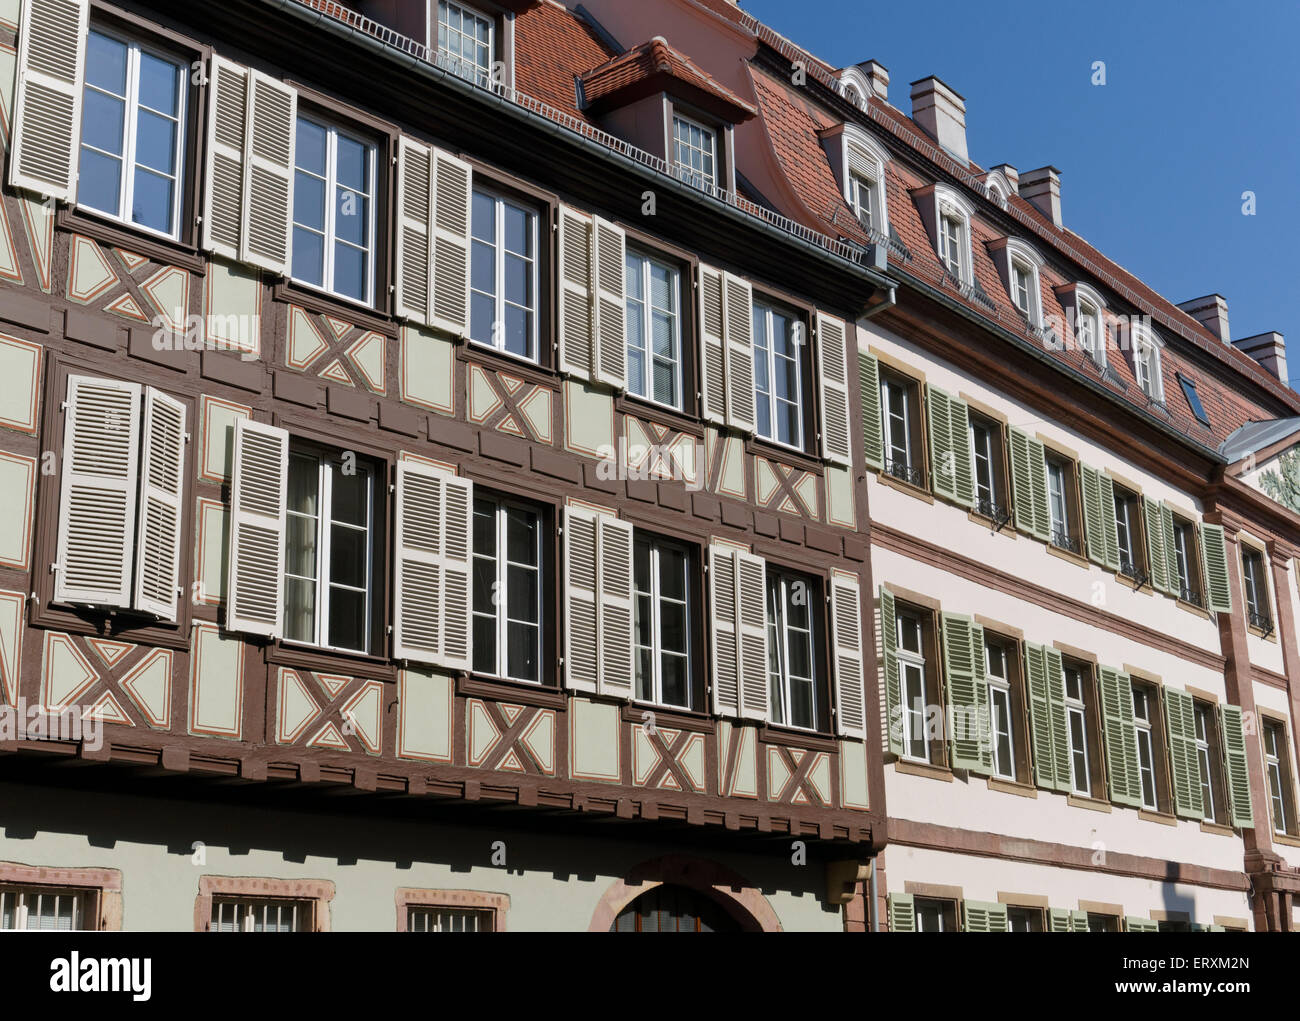 Traditional Half Timbered Houses, Colmar, Alsace, France Stock Photo